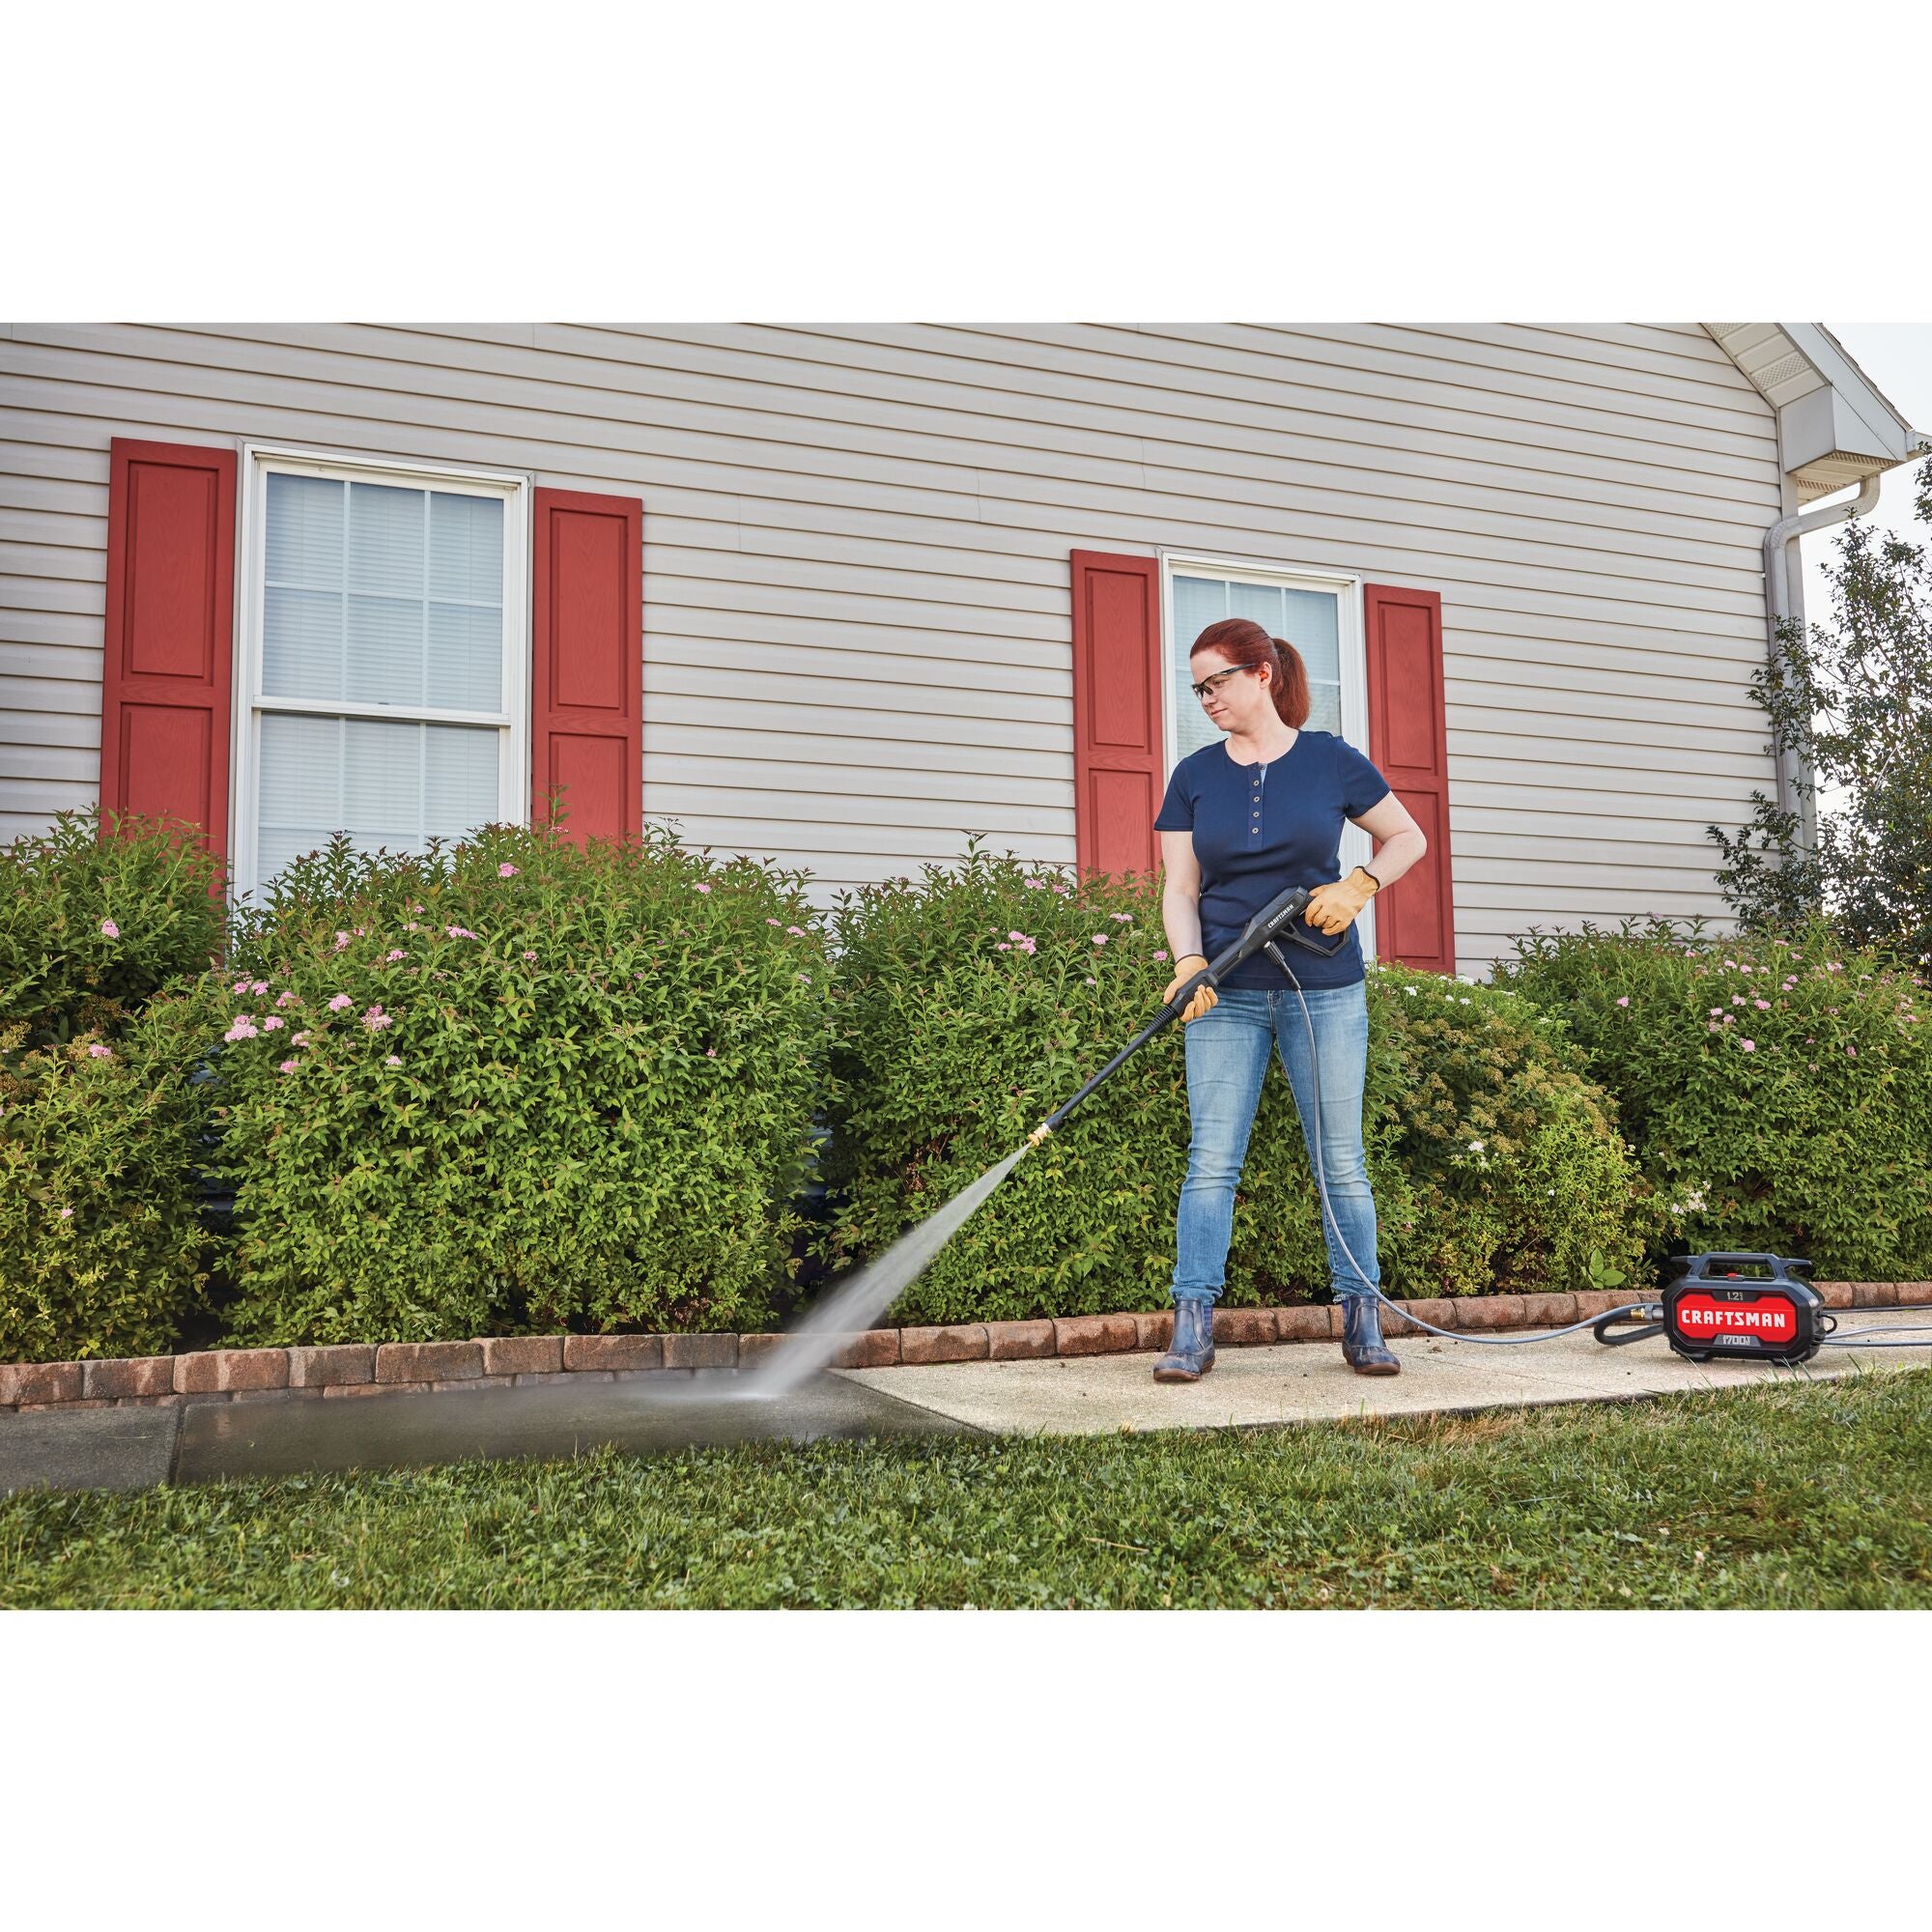 1,700 MAX psi* Electric Compact Cold Water Pressure Washer With Surfac